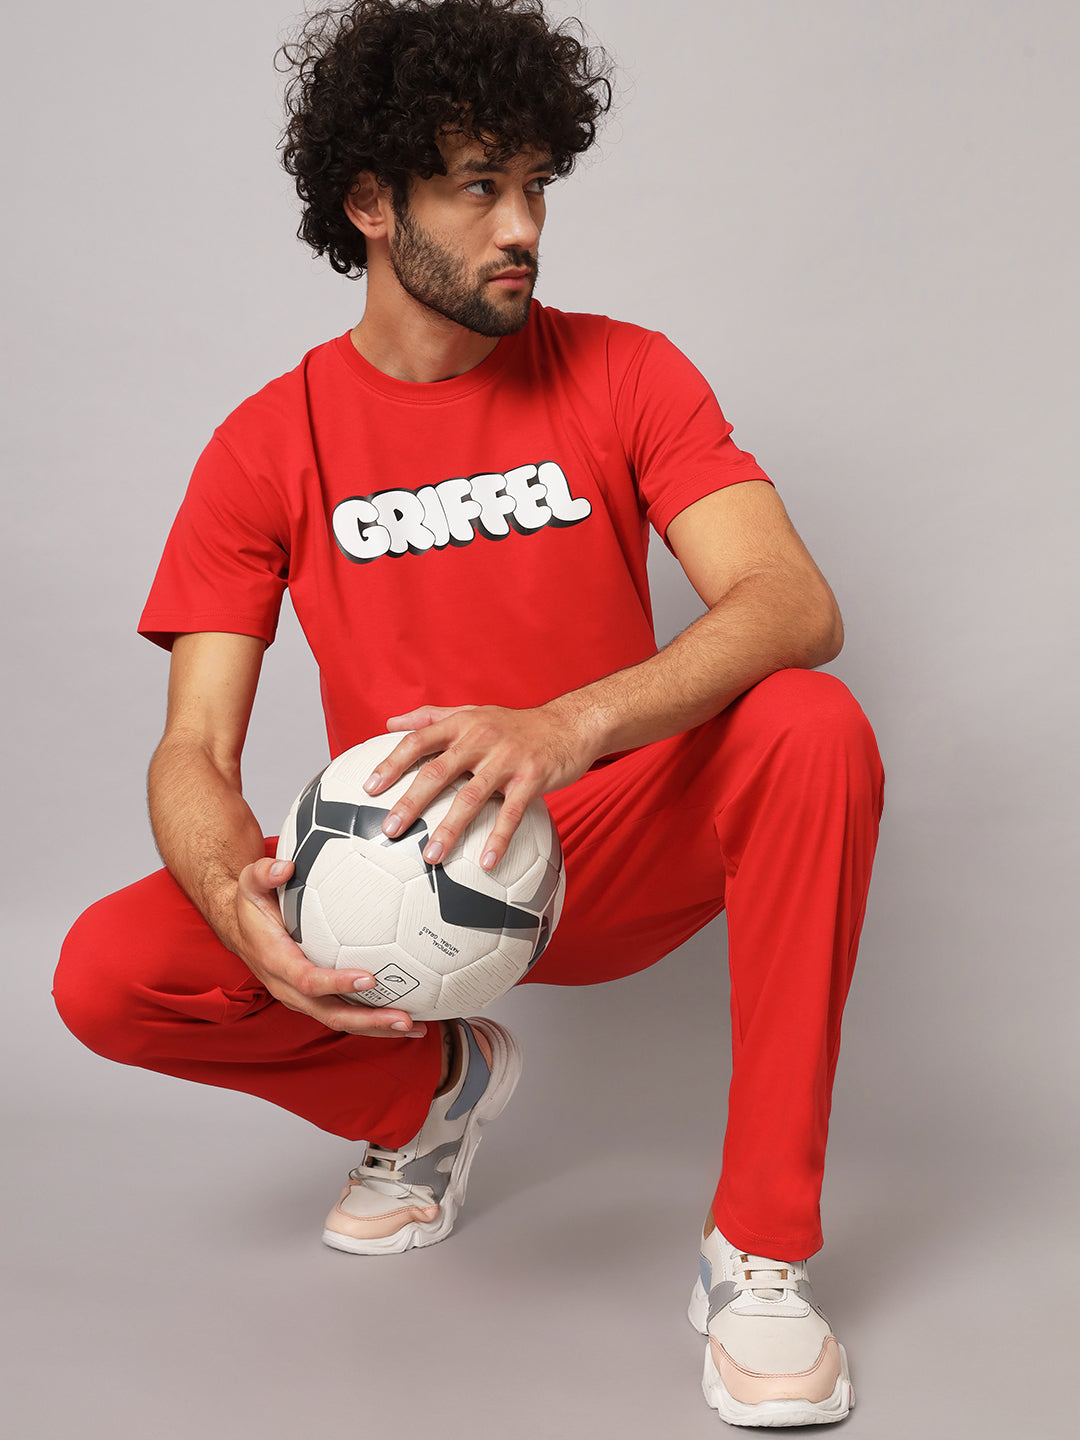 GRIFFEL Men Basic Solid Red Regular Fit T-shirt and Trackpant Set - griffel